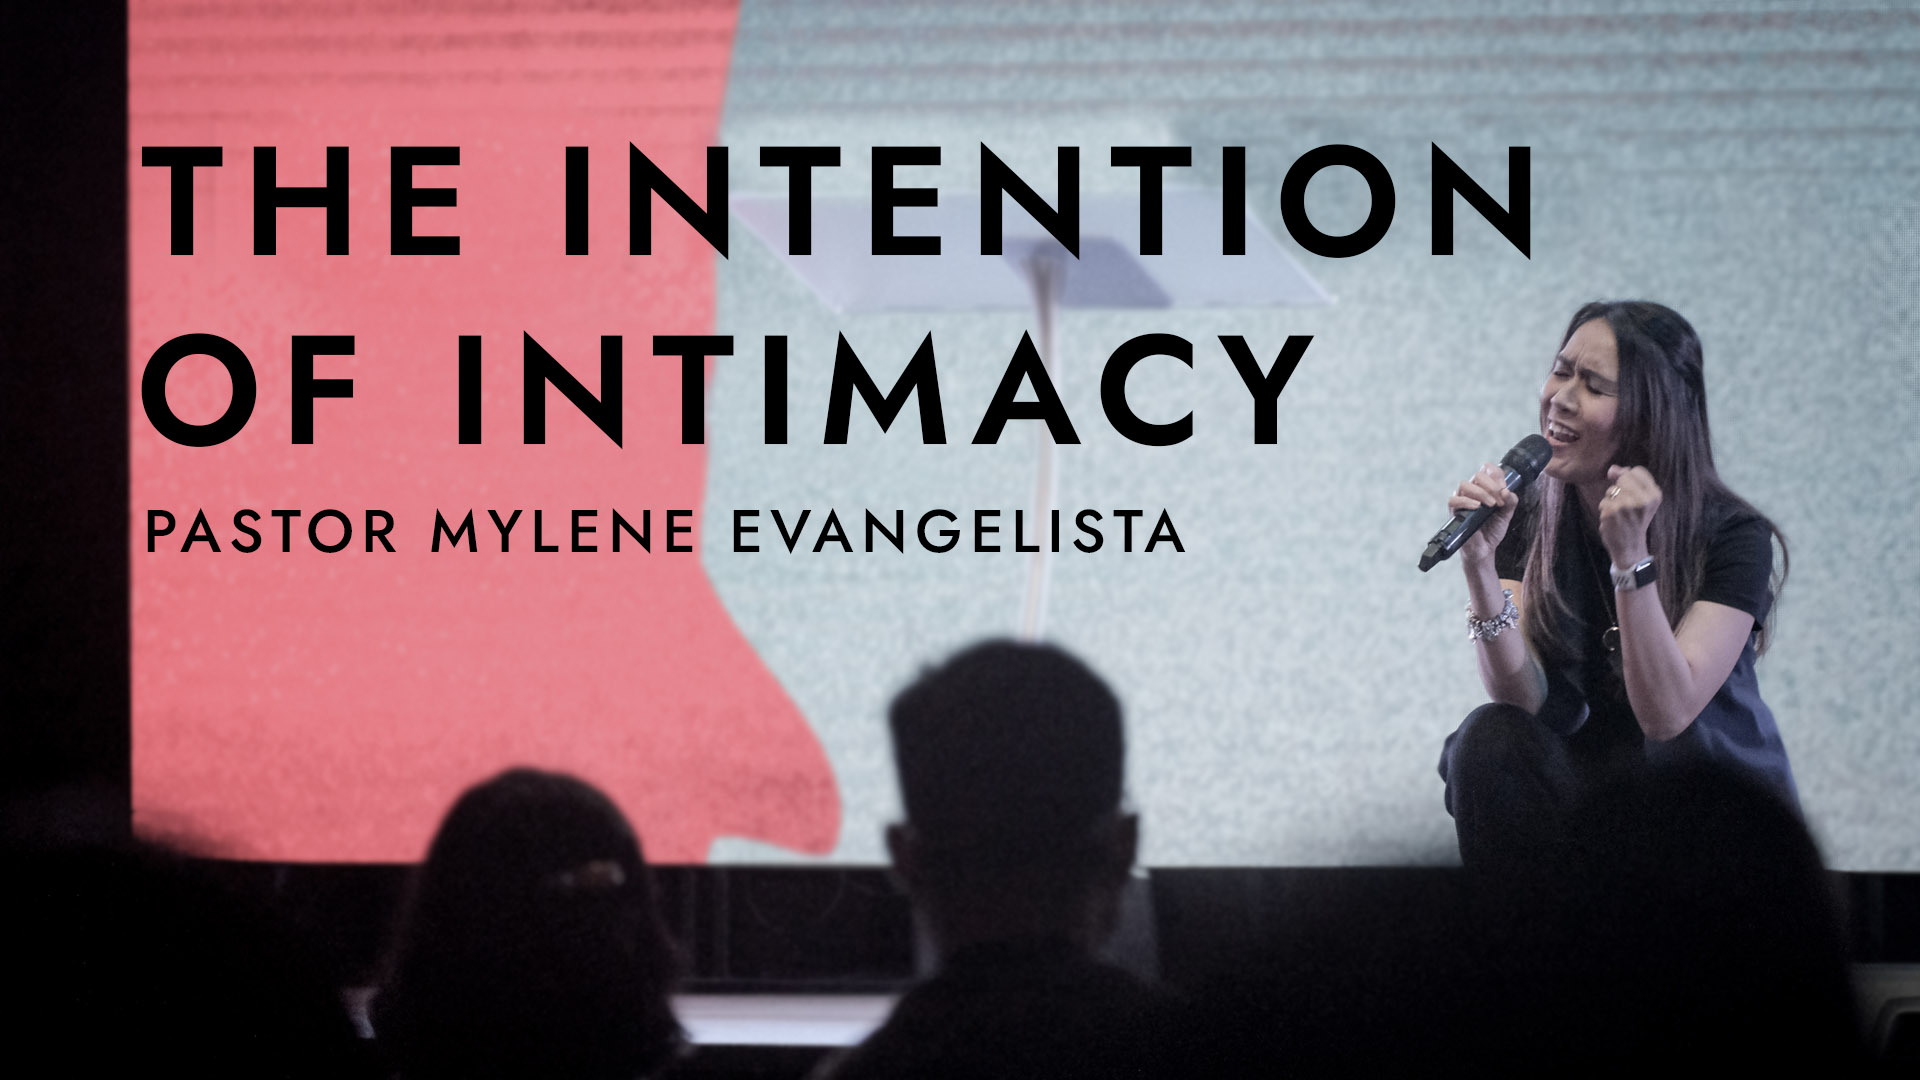 THE INTENTION OF INTIMACY